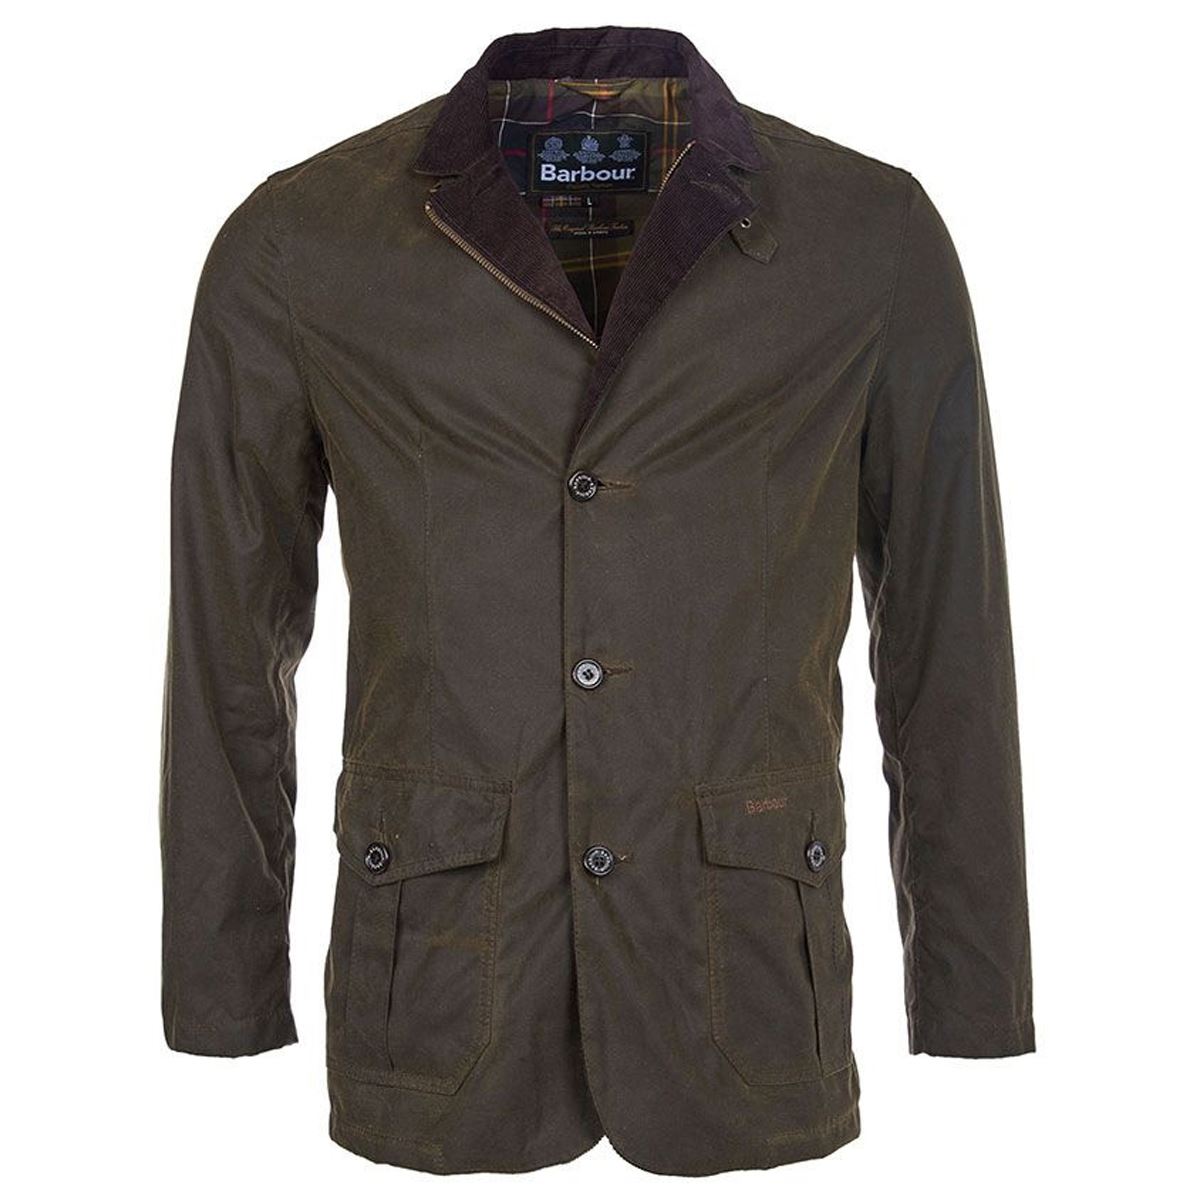 Where can I review the barbour lutz jacket online?